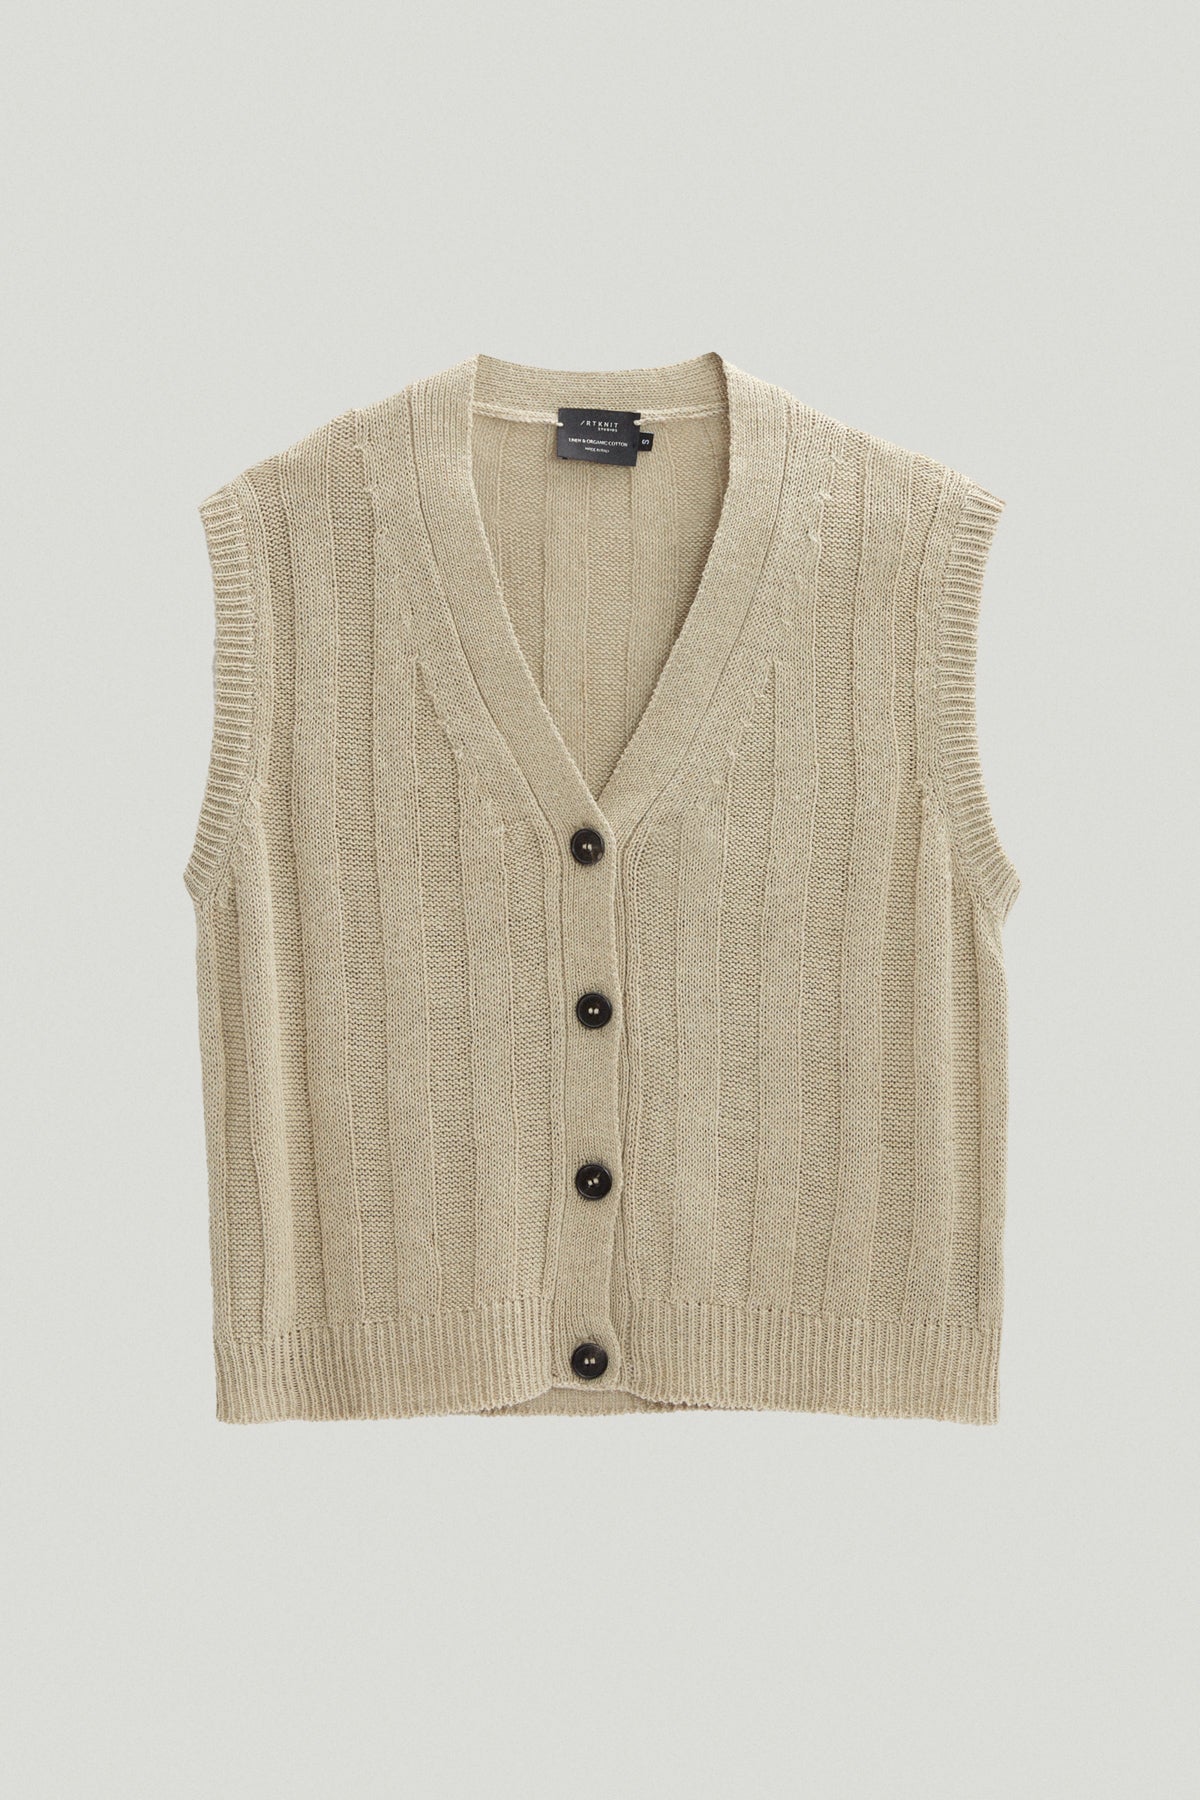 Undyed Greige | The Upcycled Linen Vest